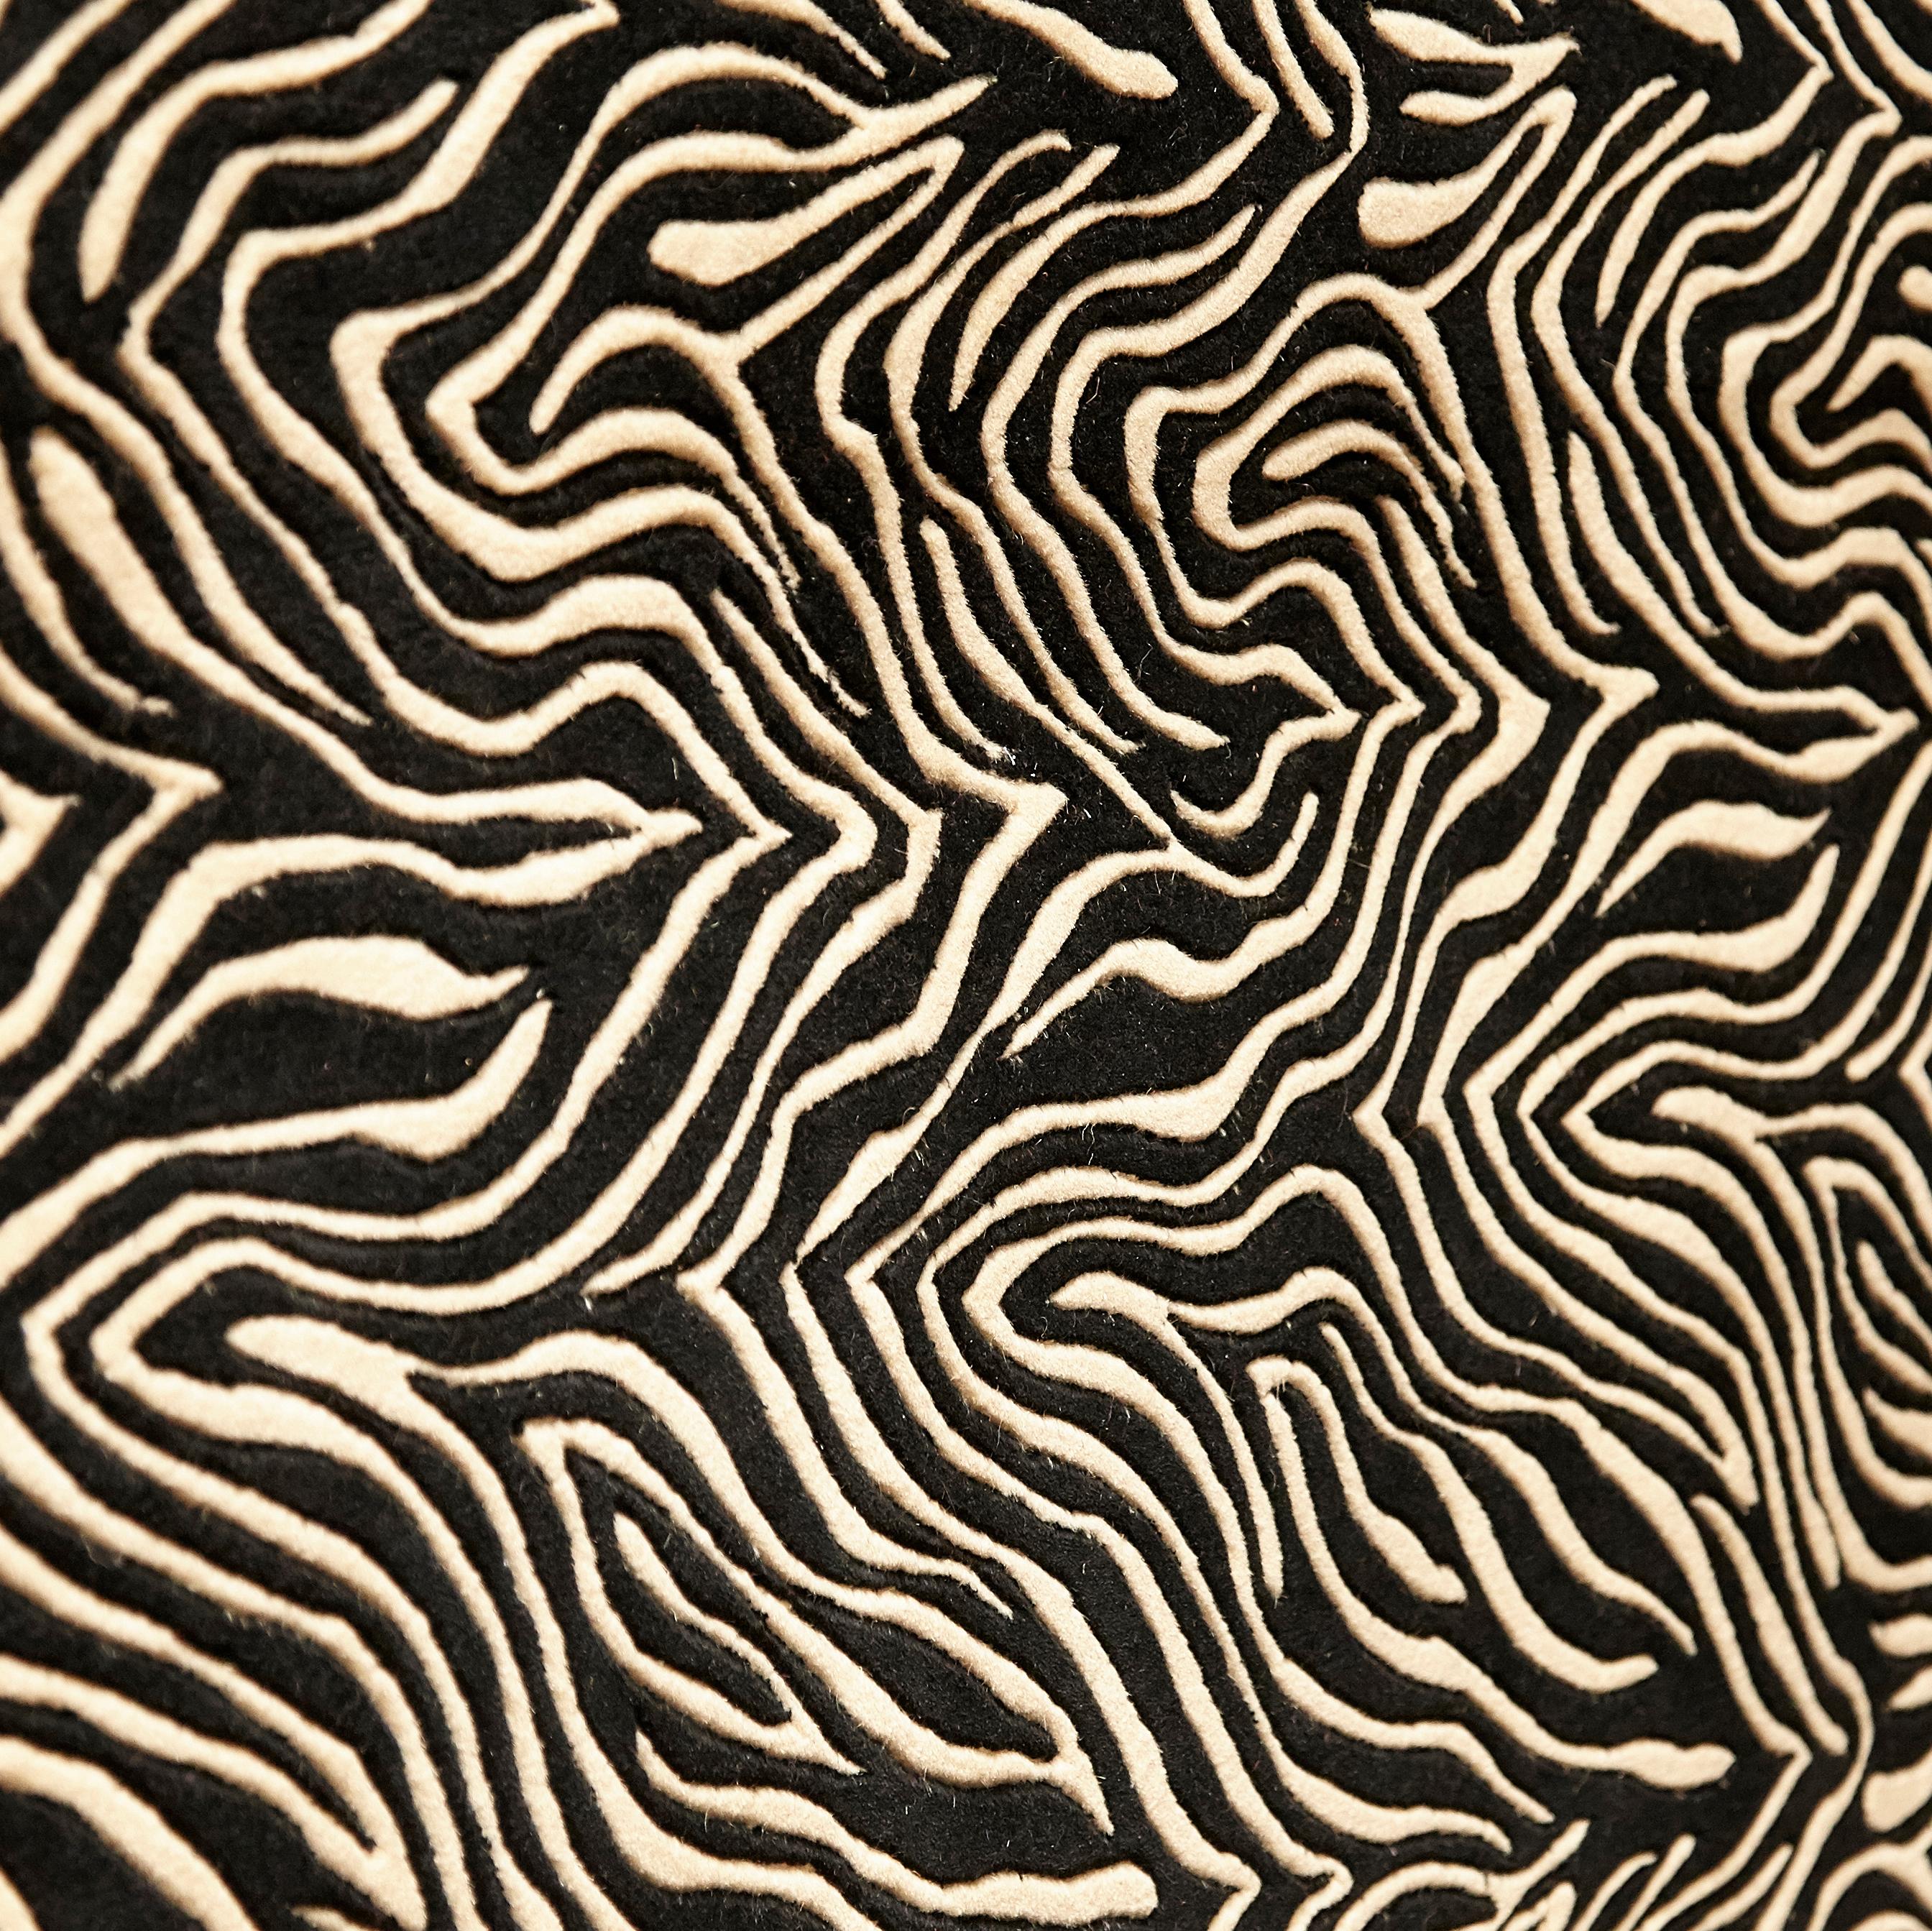 Hand-Knotted Gianni Versace Collection Rug Wild Ivy, Gold Zebra Animal Print, 1980